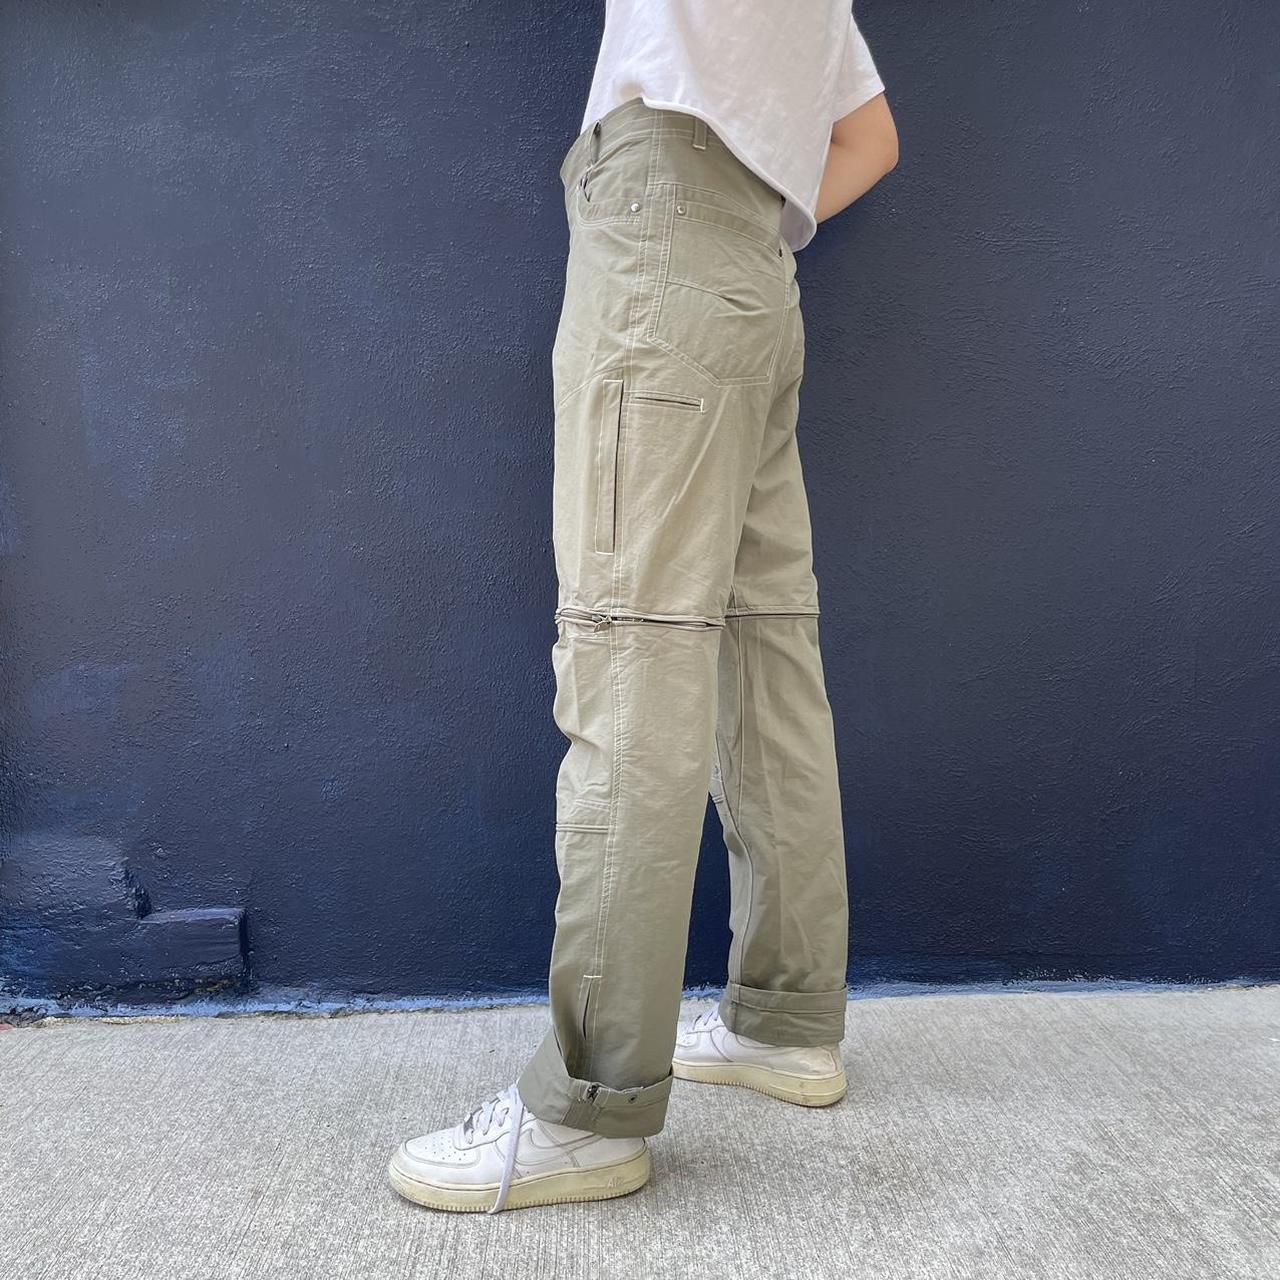 Women's Khaki Pants for sale in Chattanooga, Tennessee | Facebook  Marketplace | Facebook